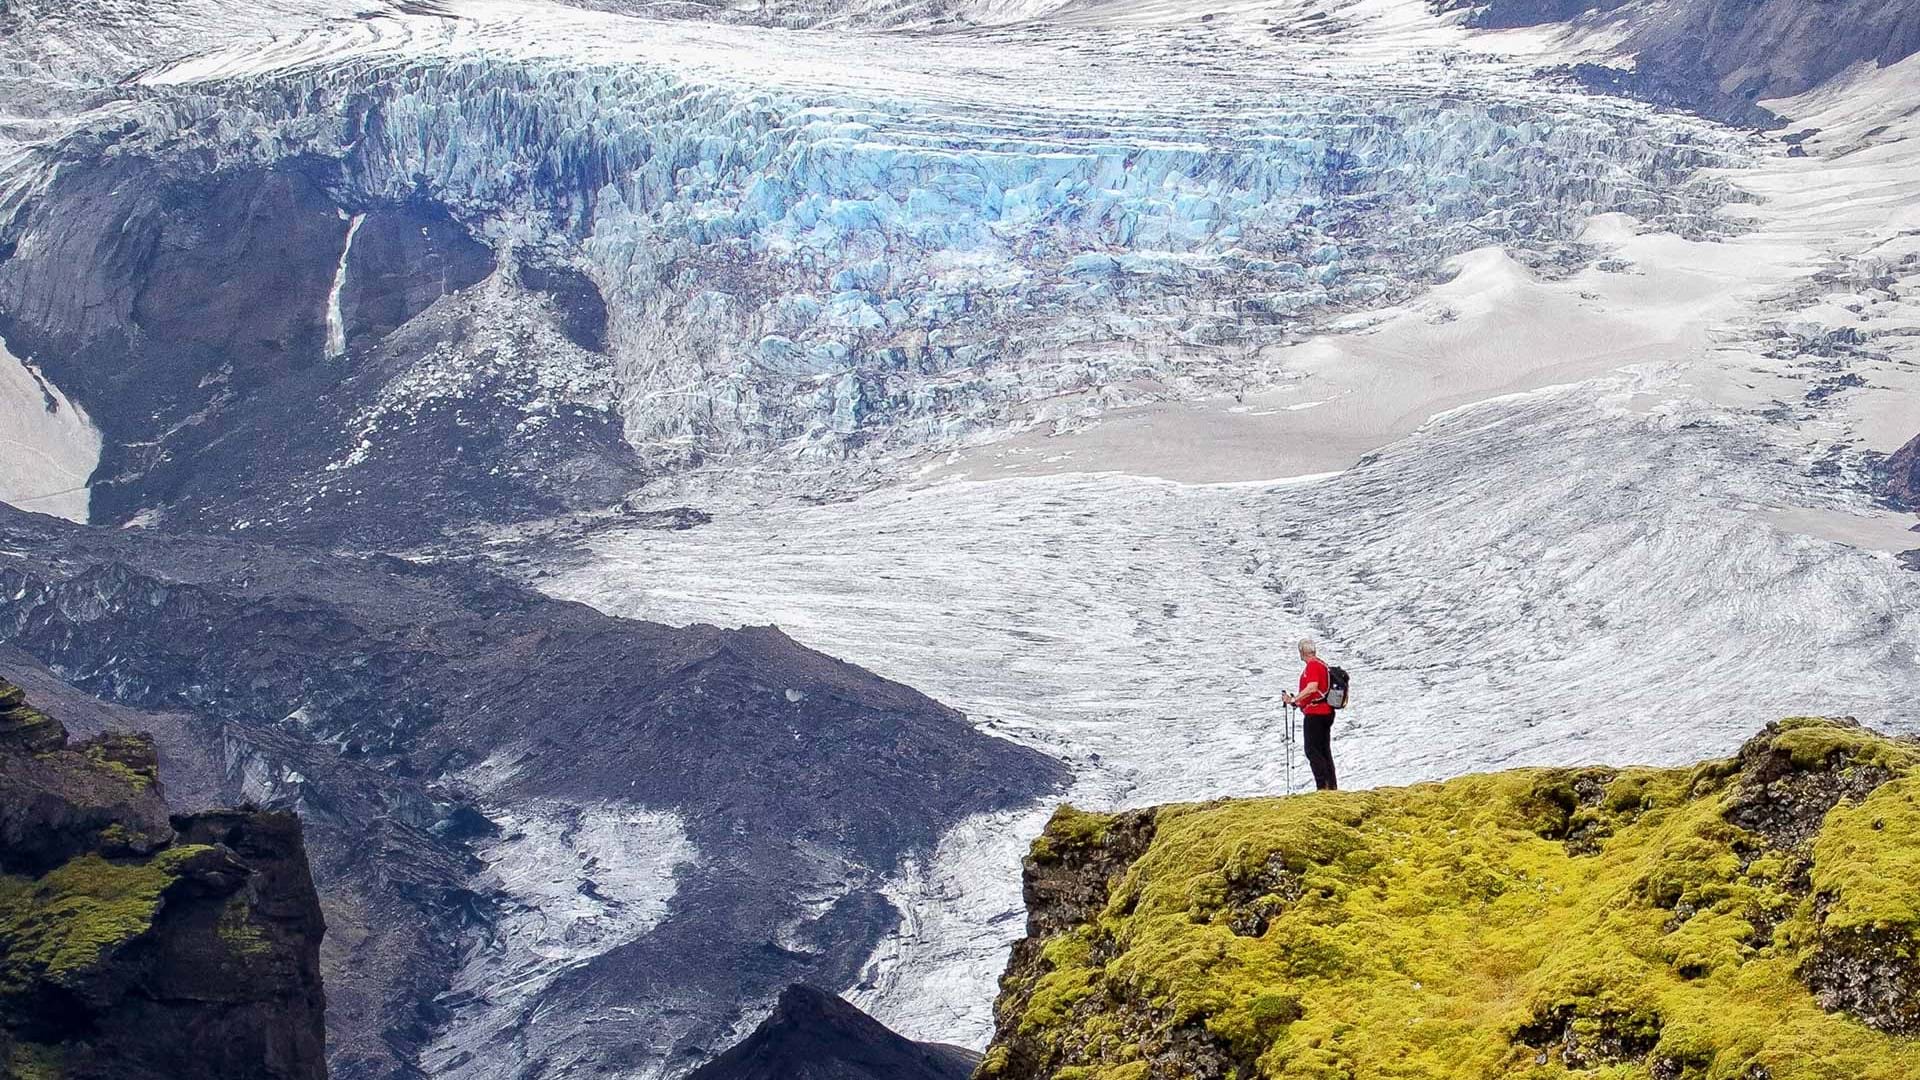 A man standing on a moss covered cliff looking at a magnificent glacier in the background